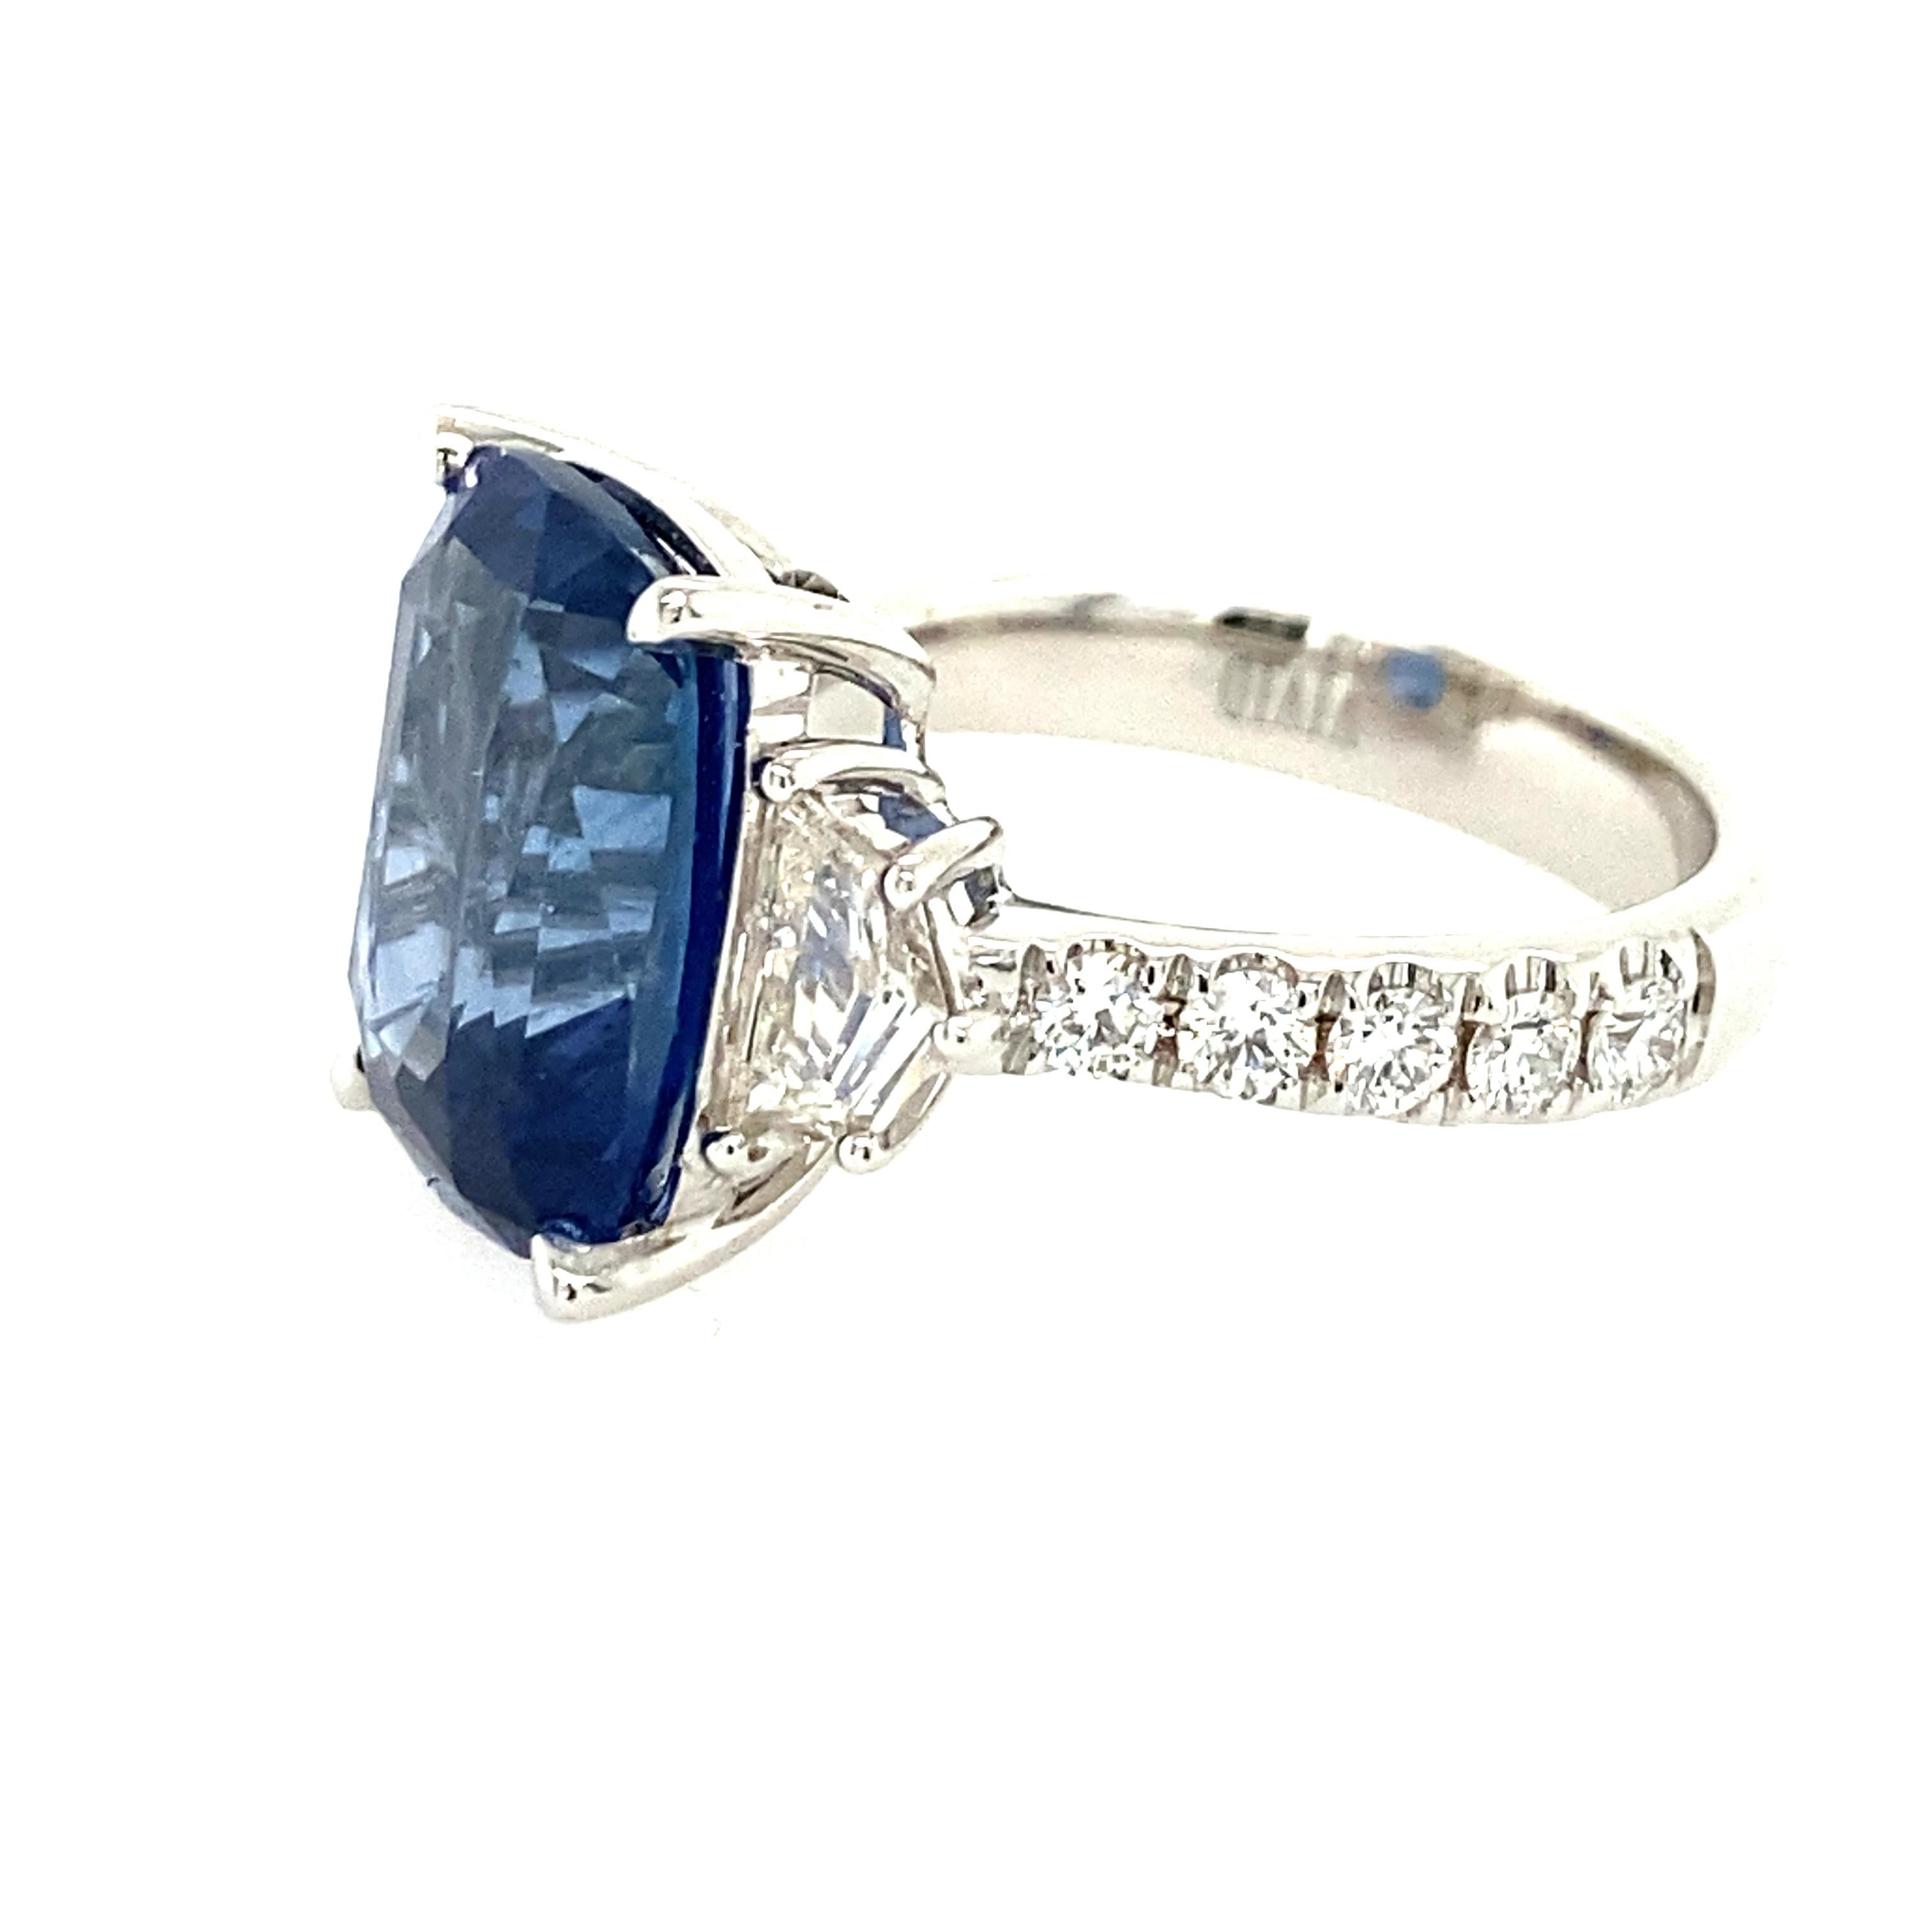 Fabulous cushion cut blue sapphire ring. The sapphire weighs 9.11carats and is GIA certified natural Ceylon (Sri Lanka) Sapphire. The sapphire measures 13.51x10.24x6.70mm. There are two shield cut diamonds on either side that weigh a total of